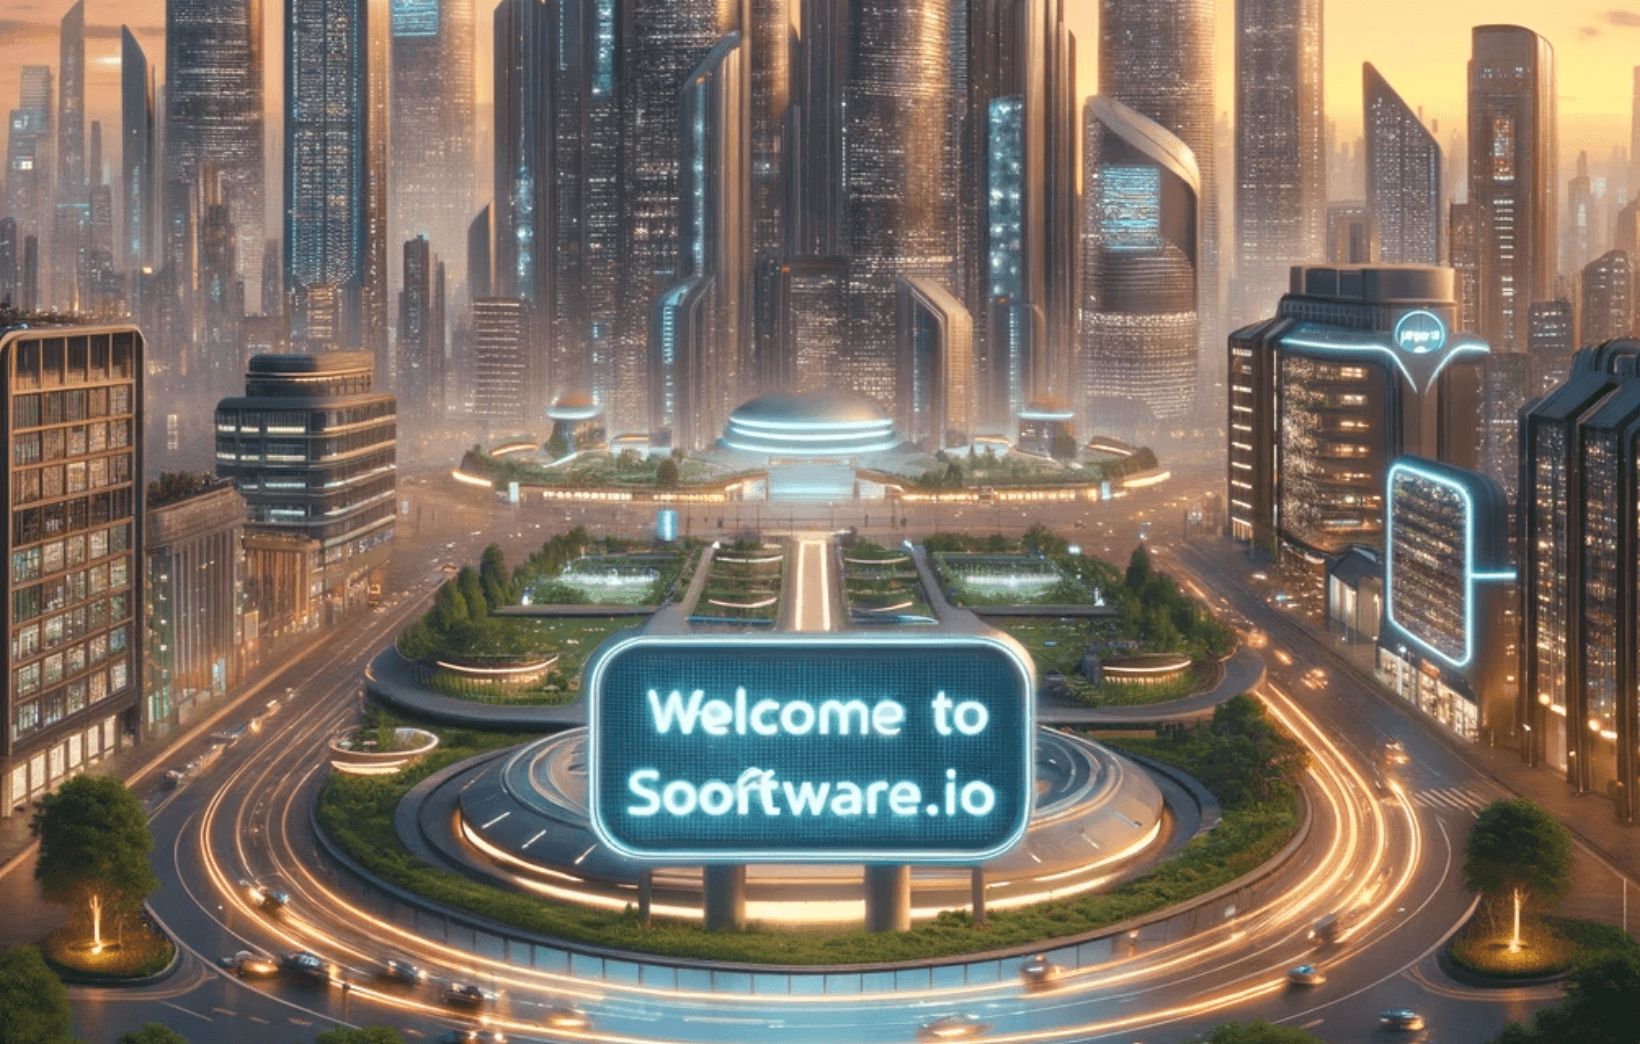 Welcome to sooftware.io